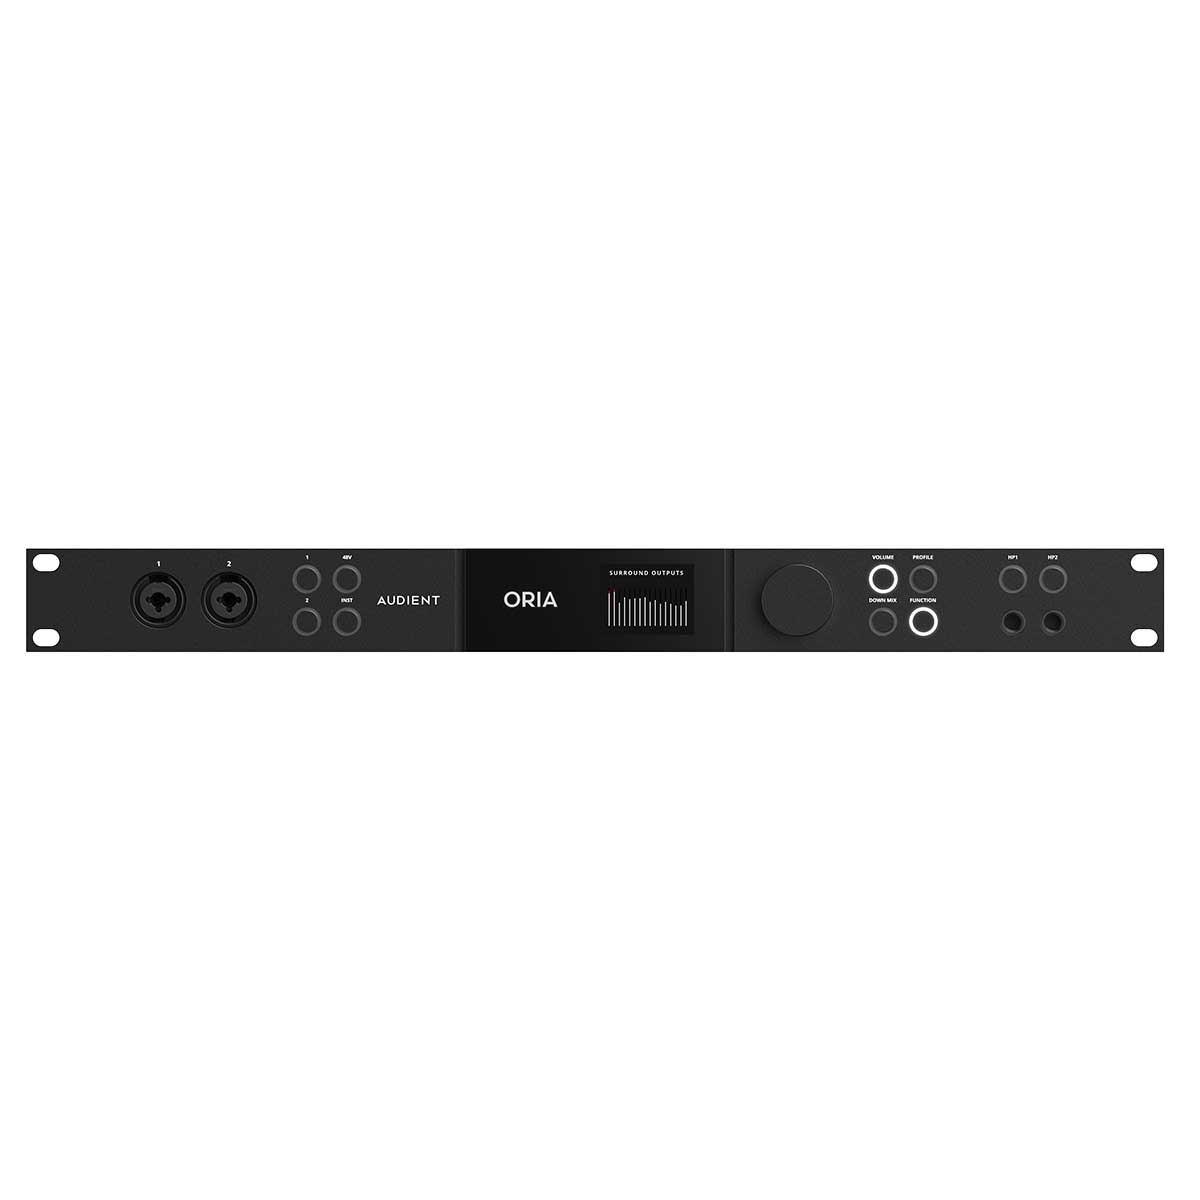 Audient Immersive Audio Interface and Monitor Controller